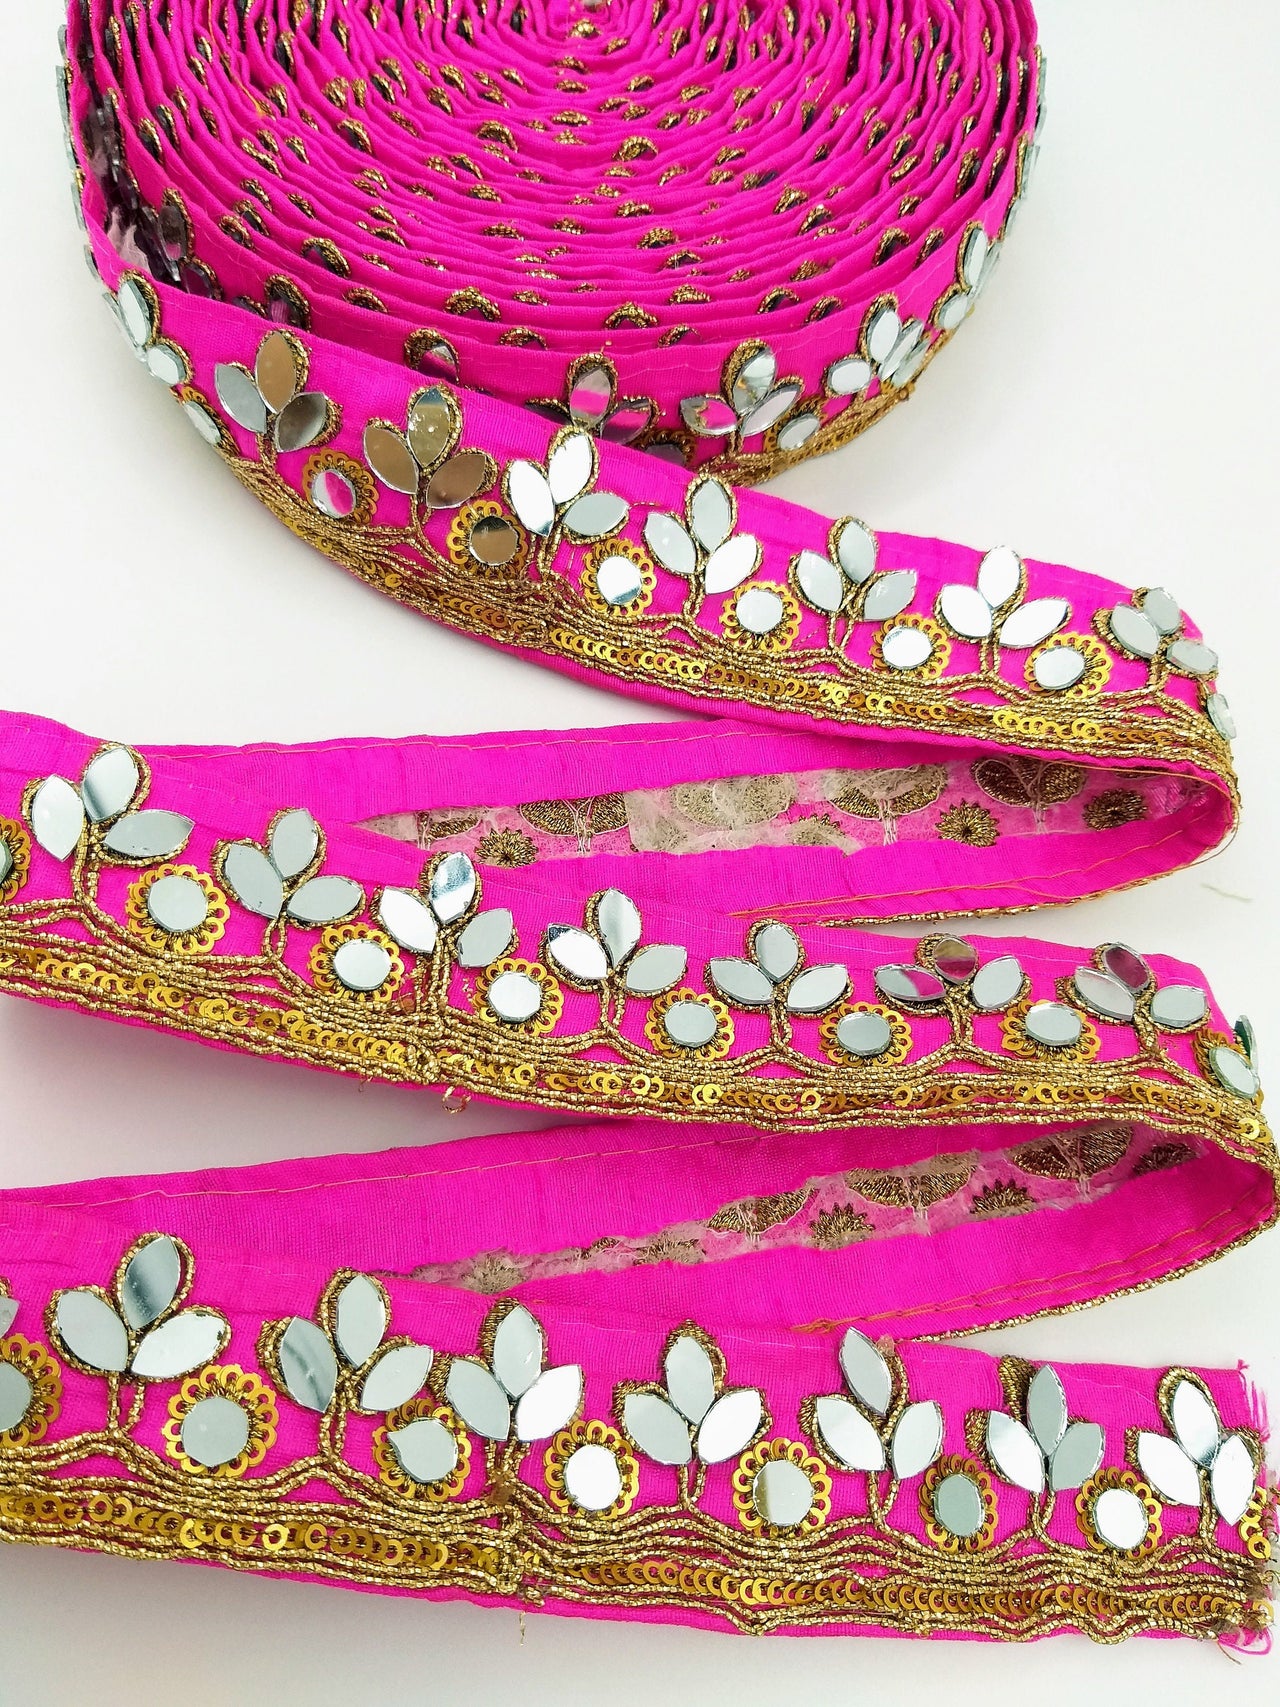 Fuchsia Pink Silk Trim With Mirrors Embellishments and Gold Embroidery, Approx. 34mm Wide, Decorative Trim Costume Trim Fashion Trim By Yard